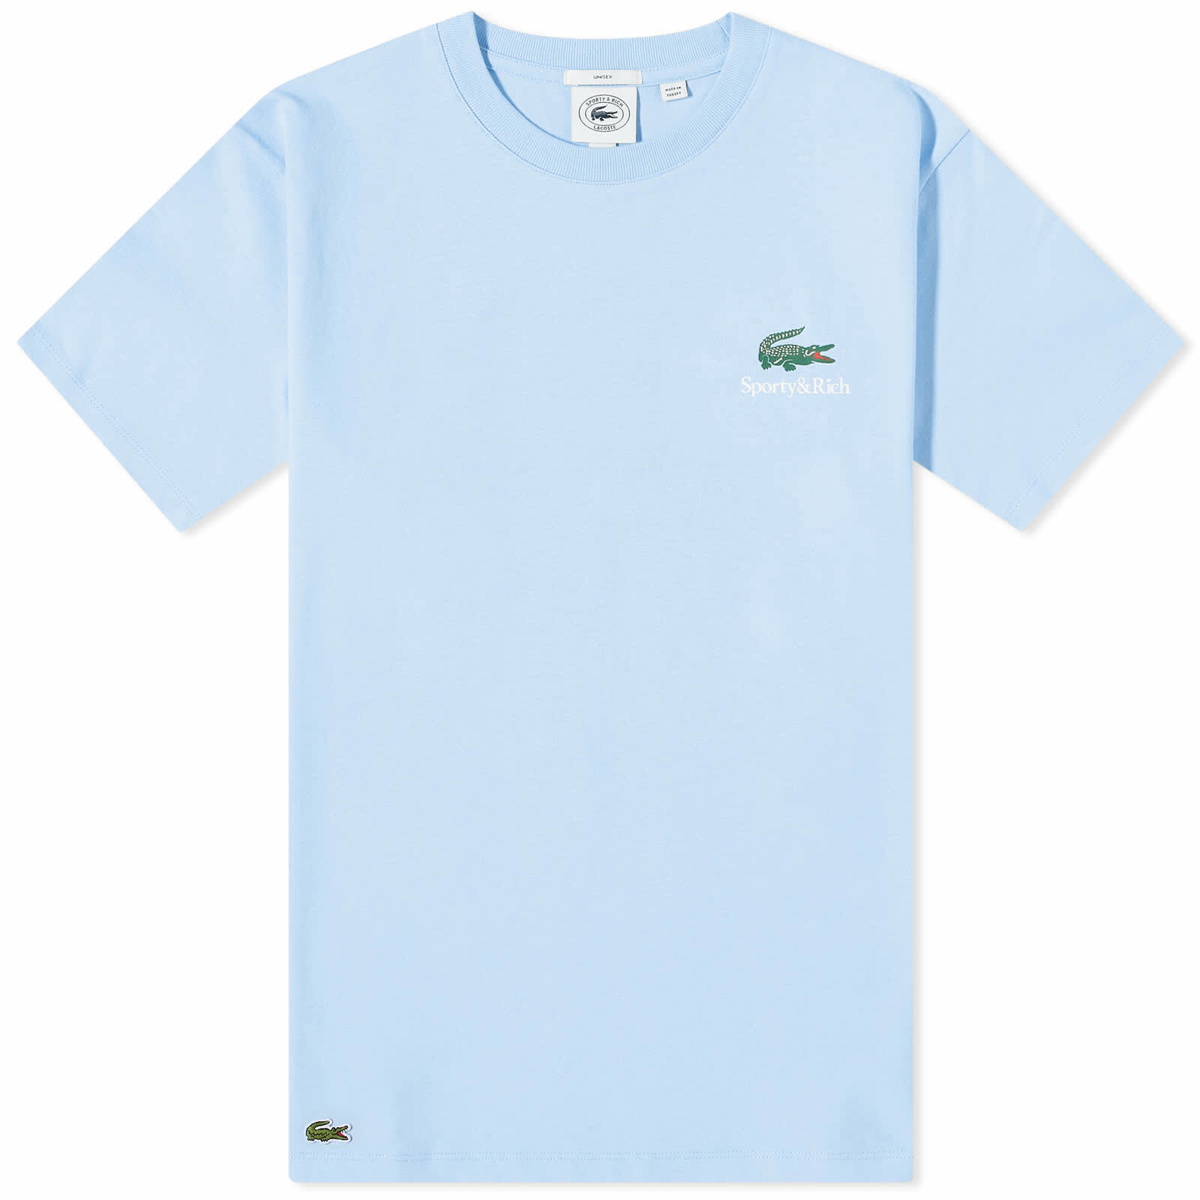 Sporty & Rich x Lacoste Play Tennis T-Shirt in Panorama/Farine